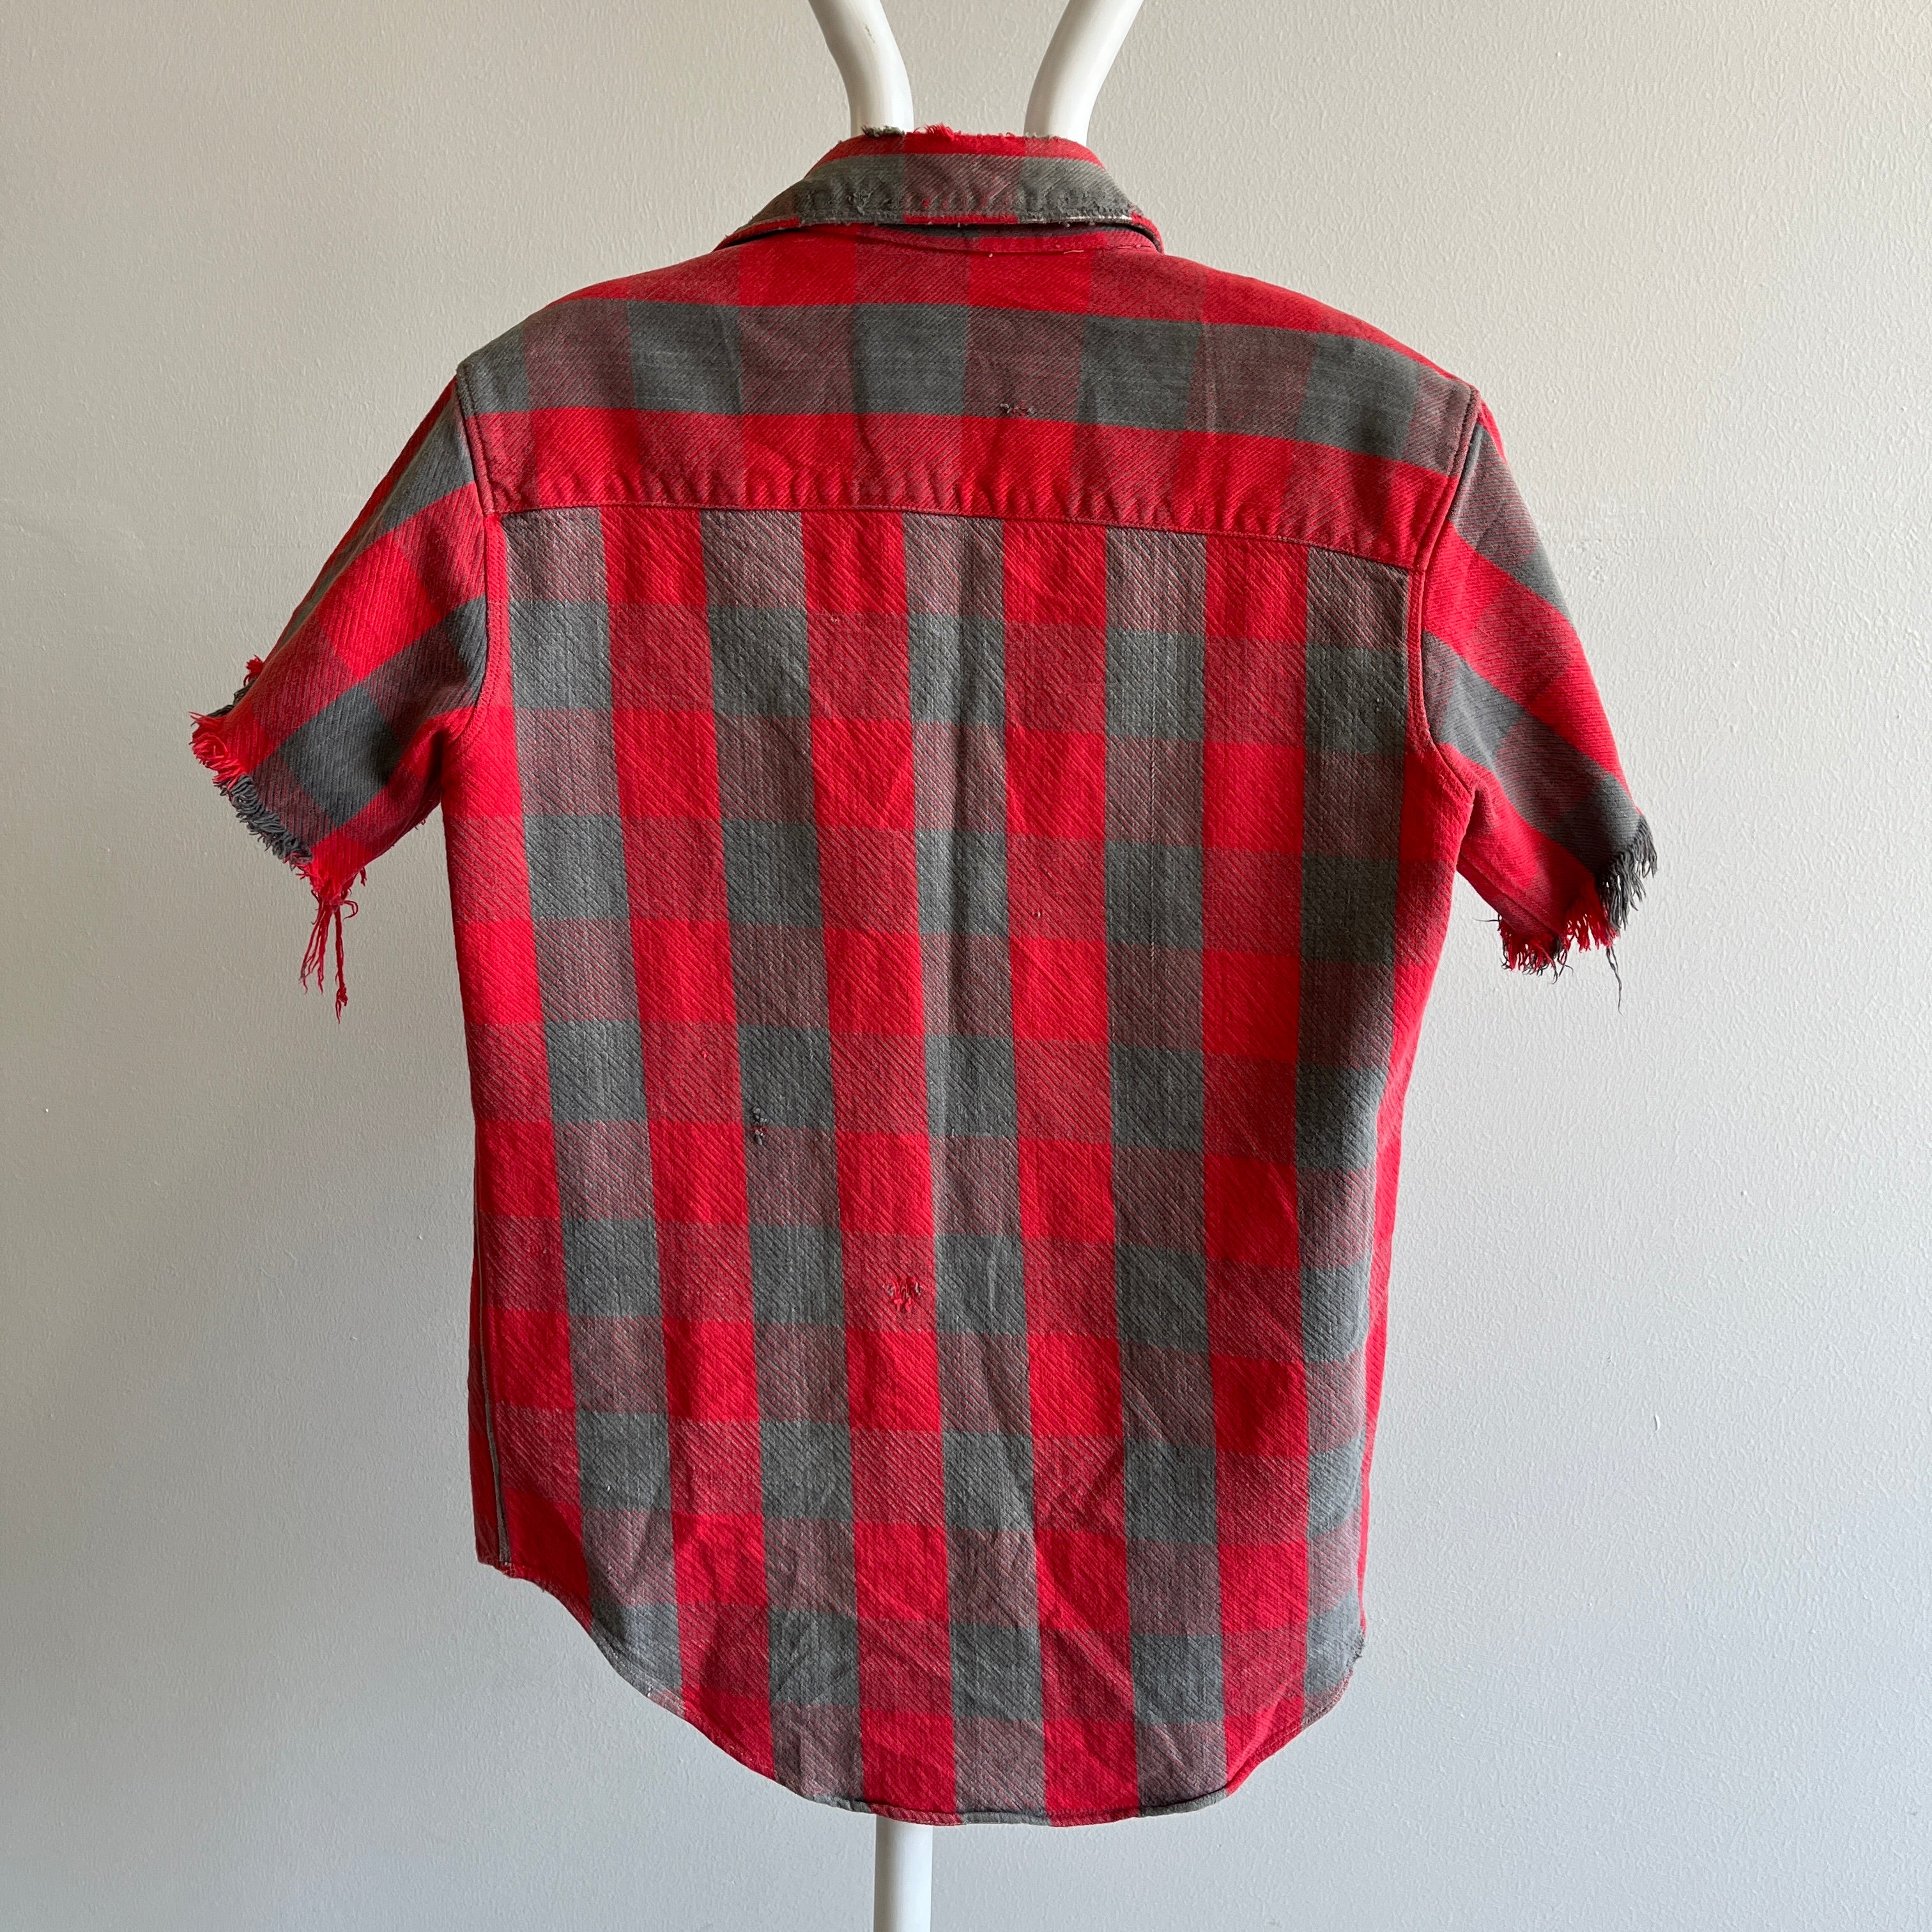 1970/80s Very Beat Up Short Sleeved Flannel - Missing Buttons